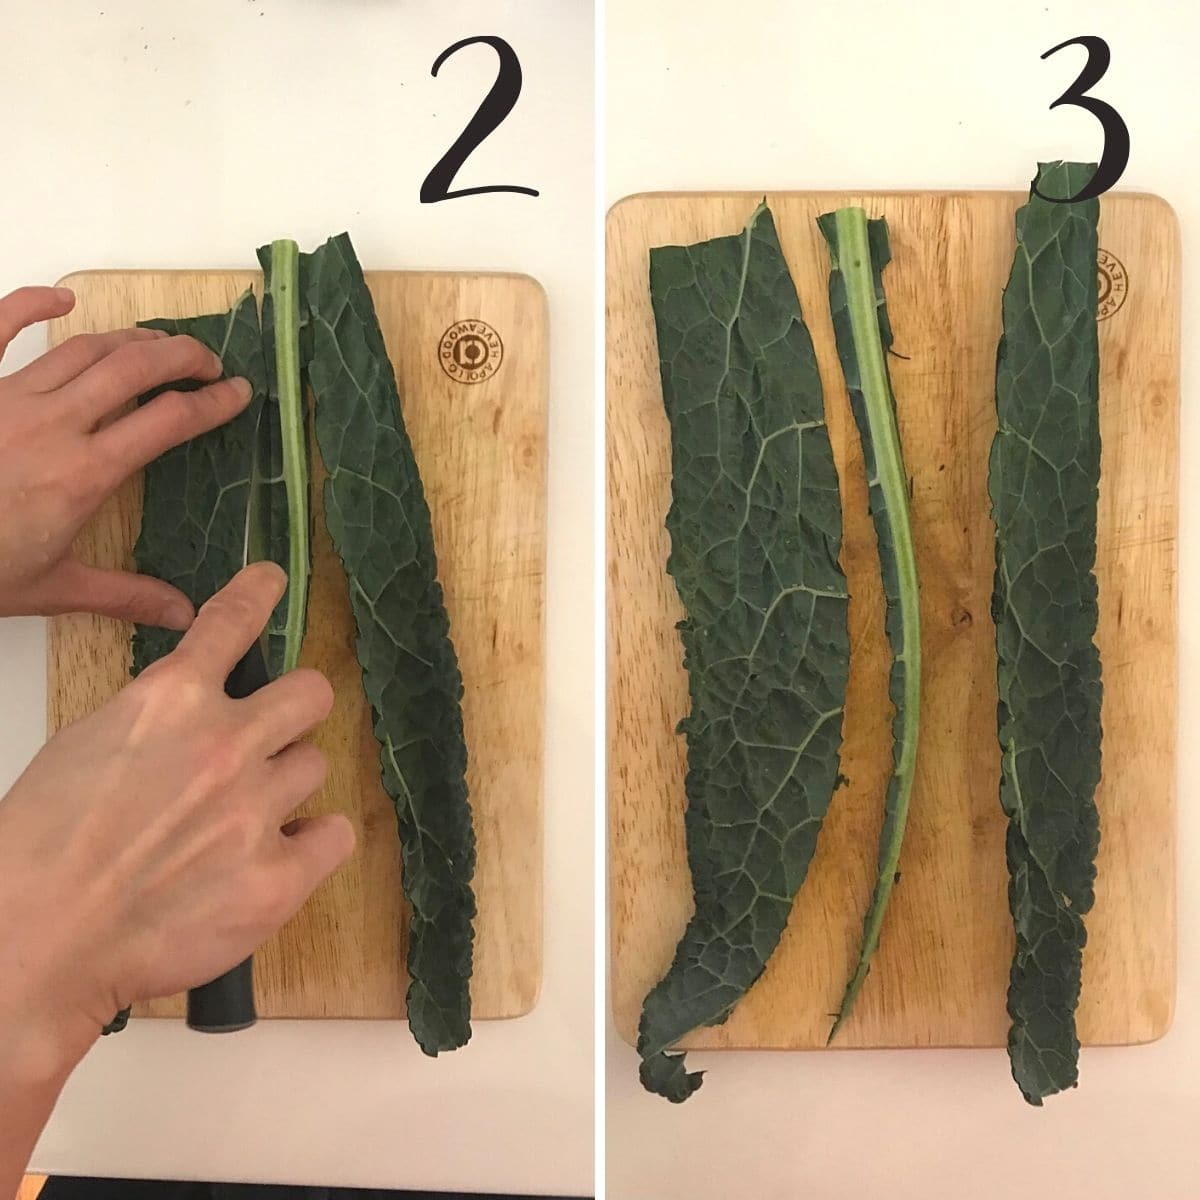 Steps 2 & 3 showing cutting away central stalk of cavolo nero.